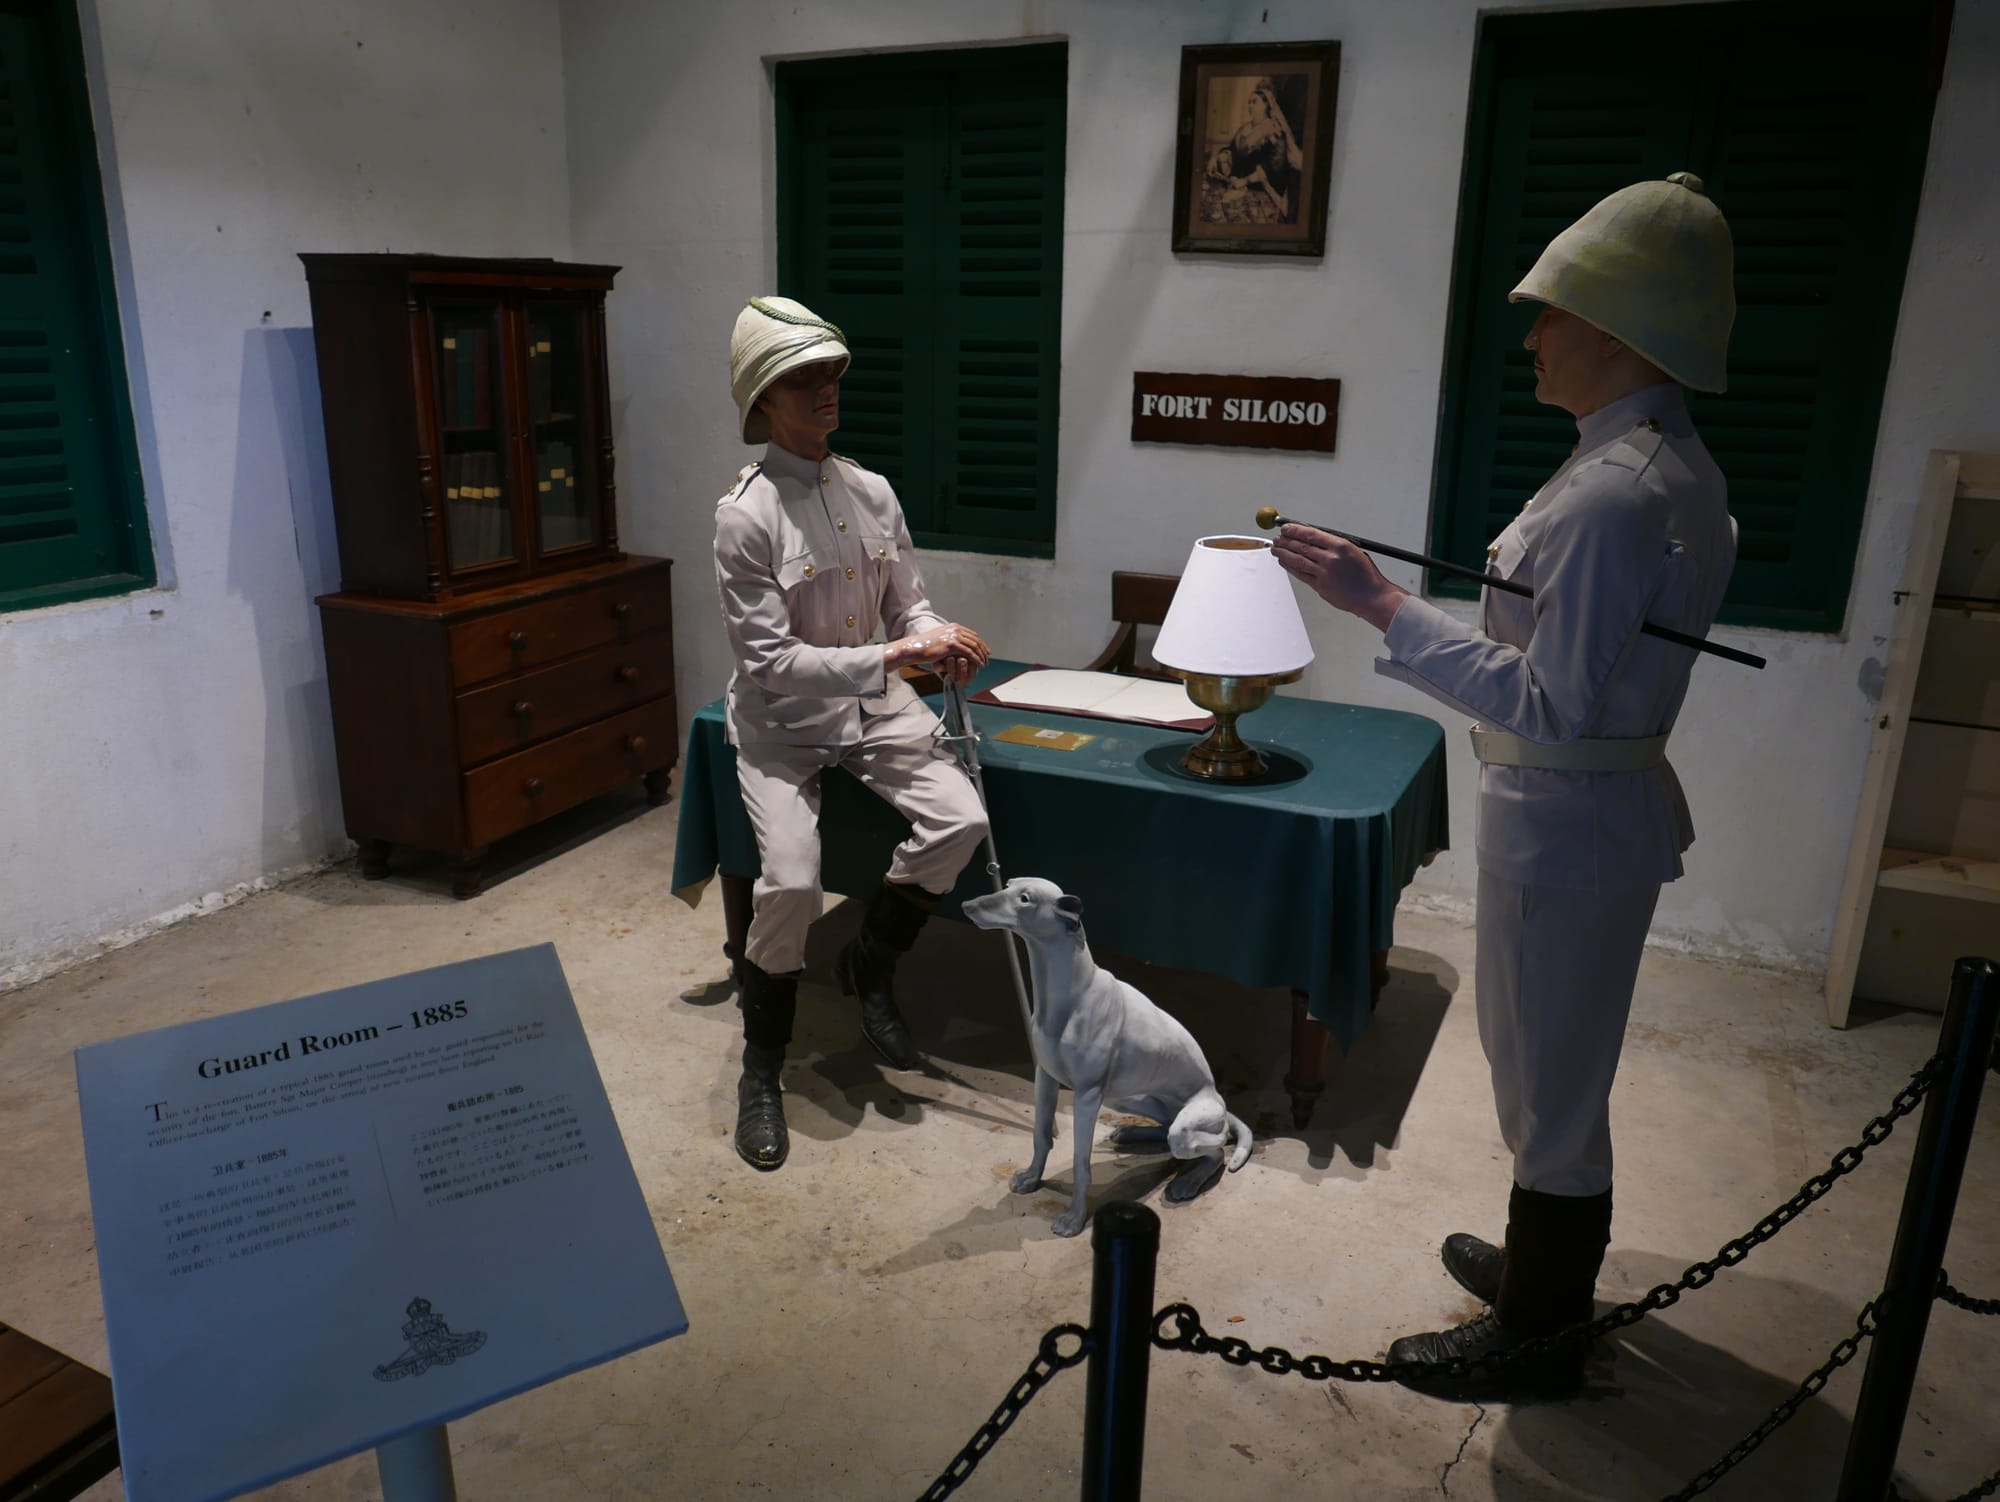 Photo by Author — inside the Guard Room at Fort Siloso, Singapore